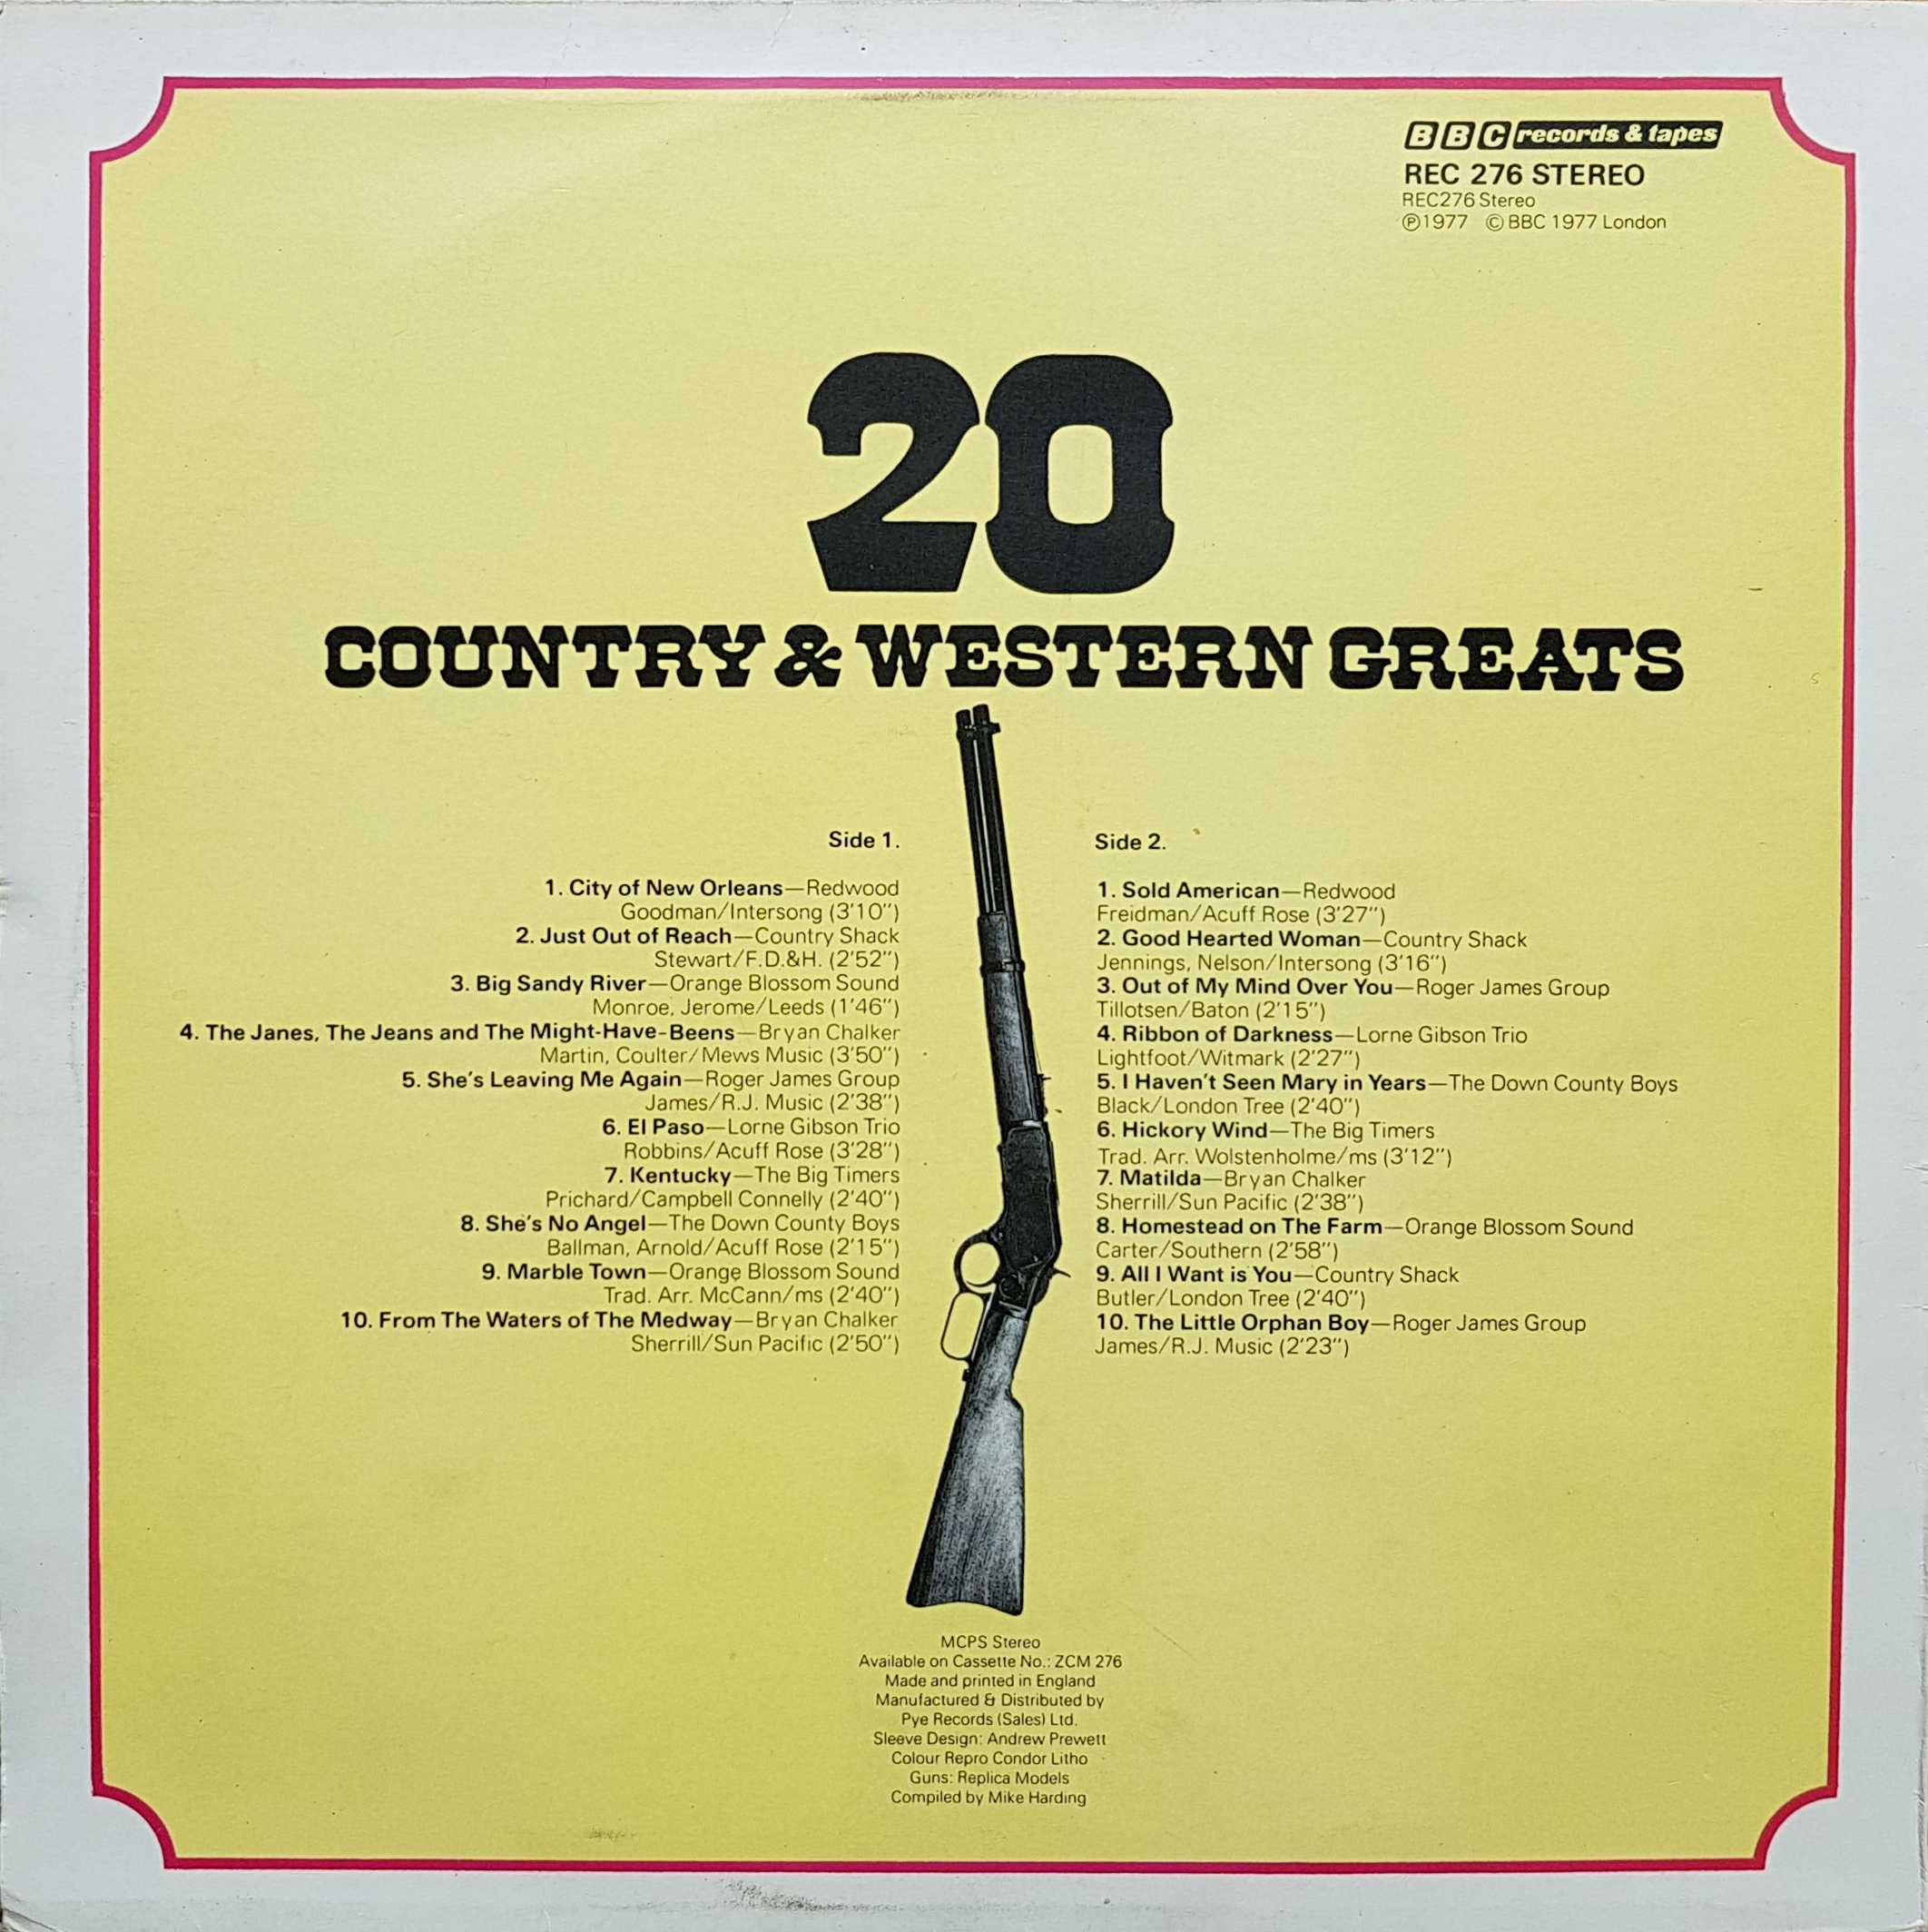 Picture of REC 276 20 Country and Western greats  by artist Various from the BBC records and Tapes library